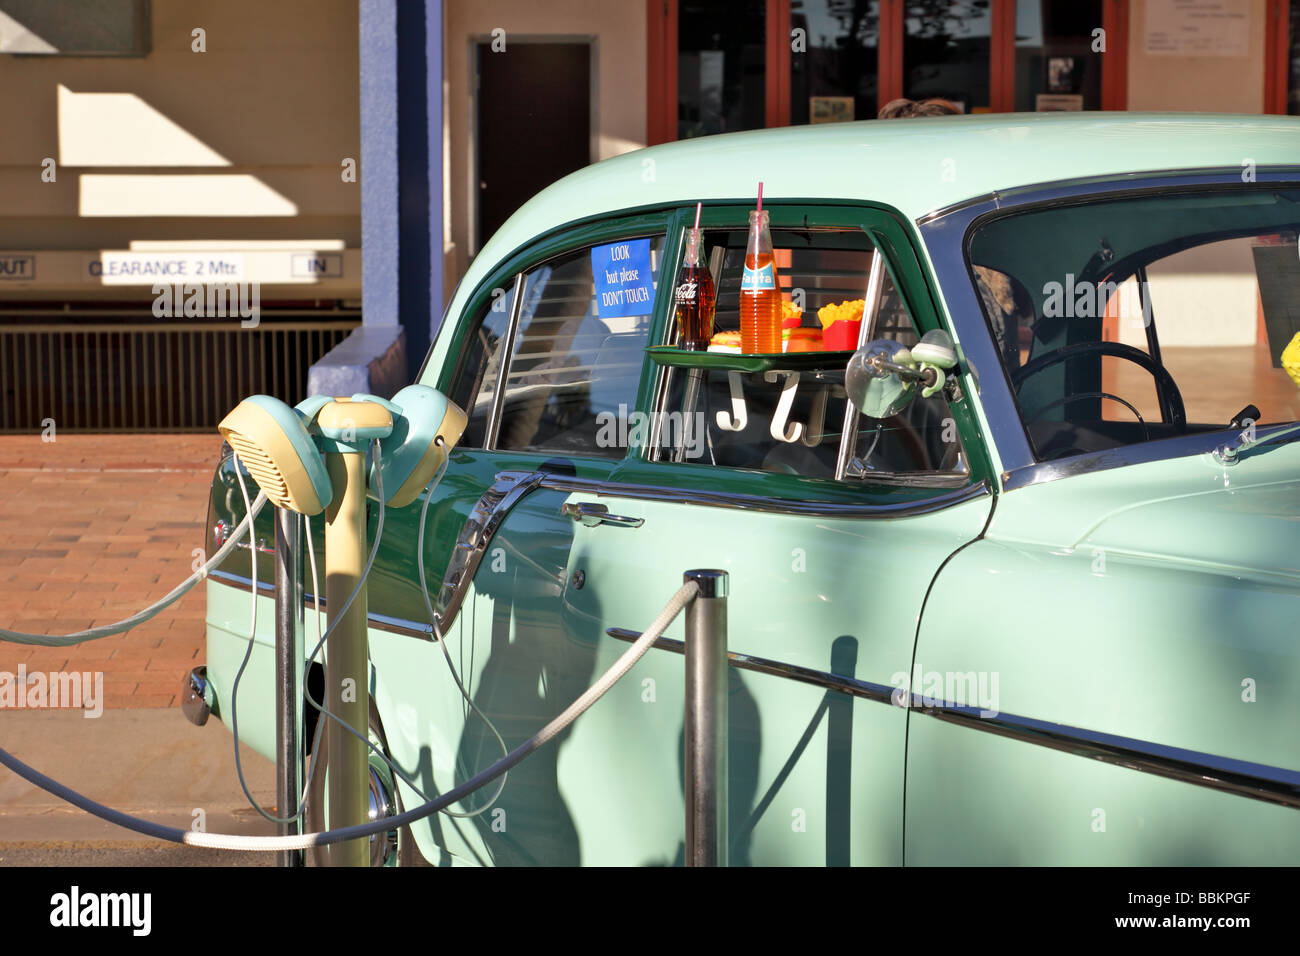 Vintage car with fifties drive in speakers and tray of food Stock Photo